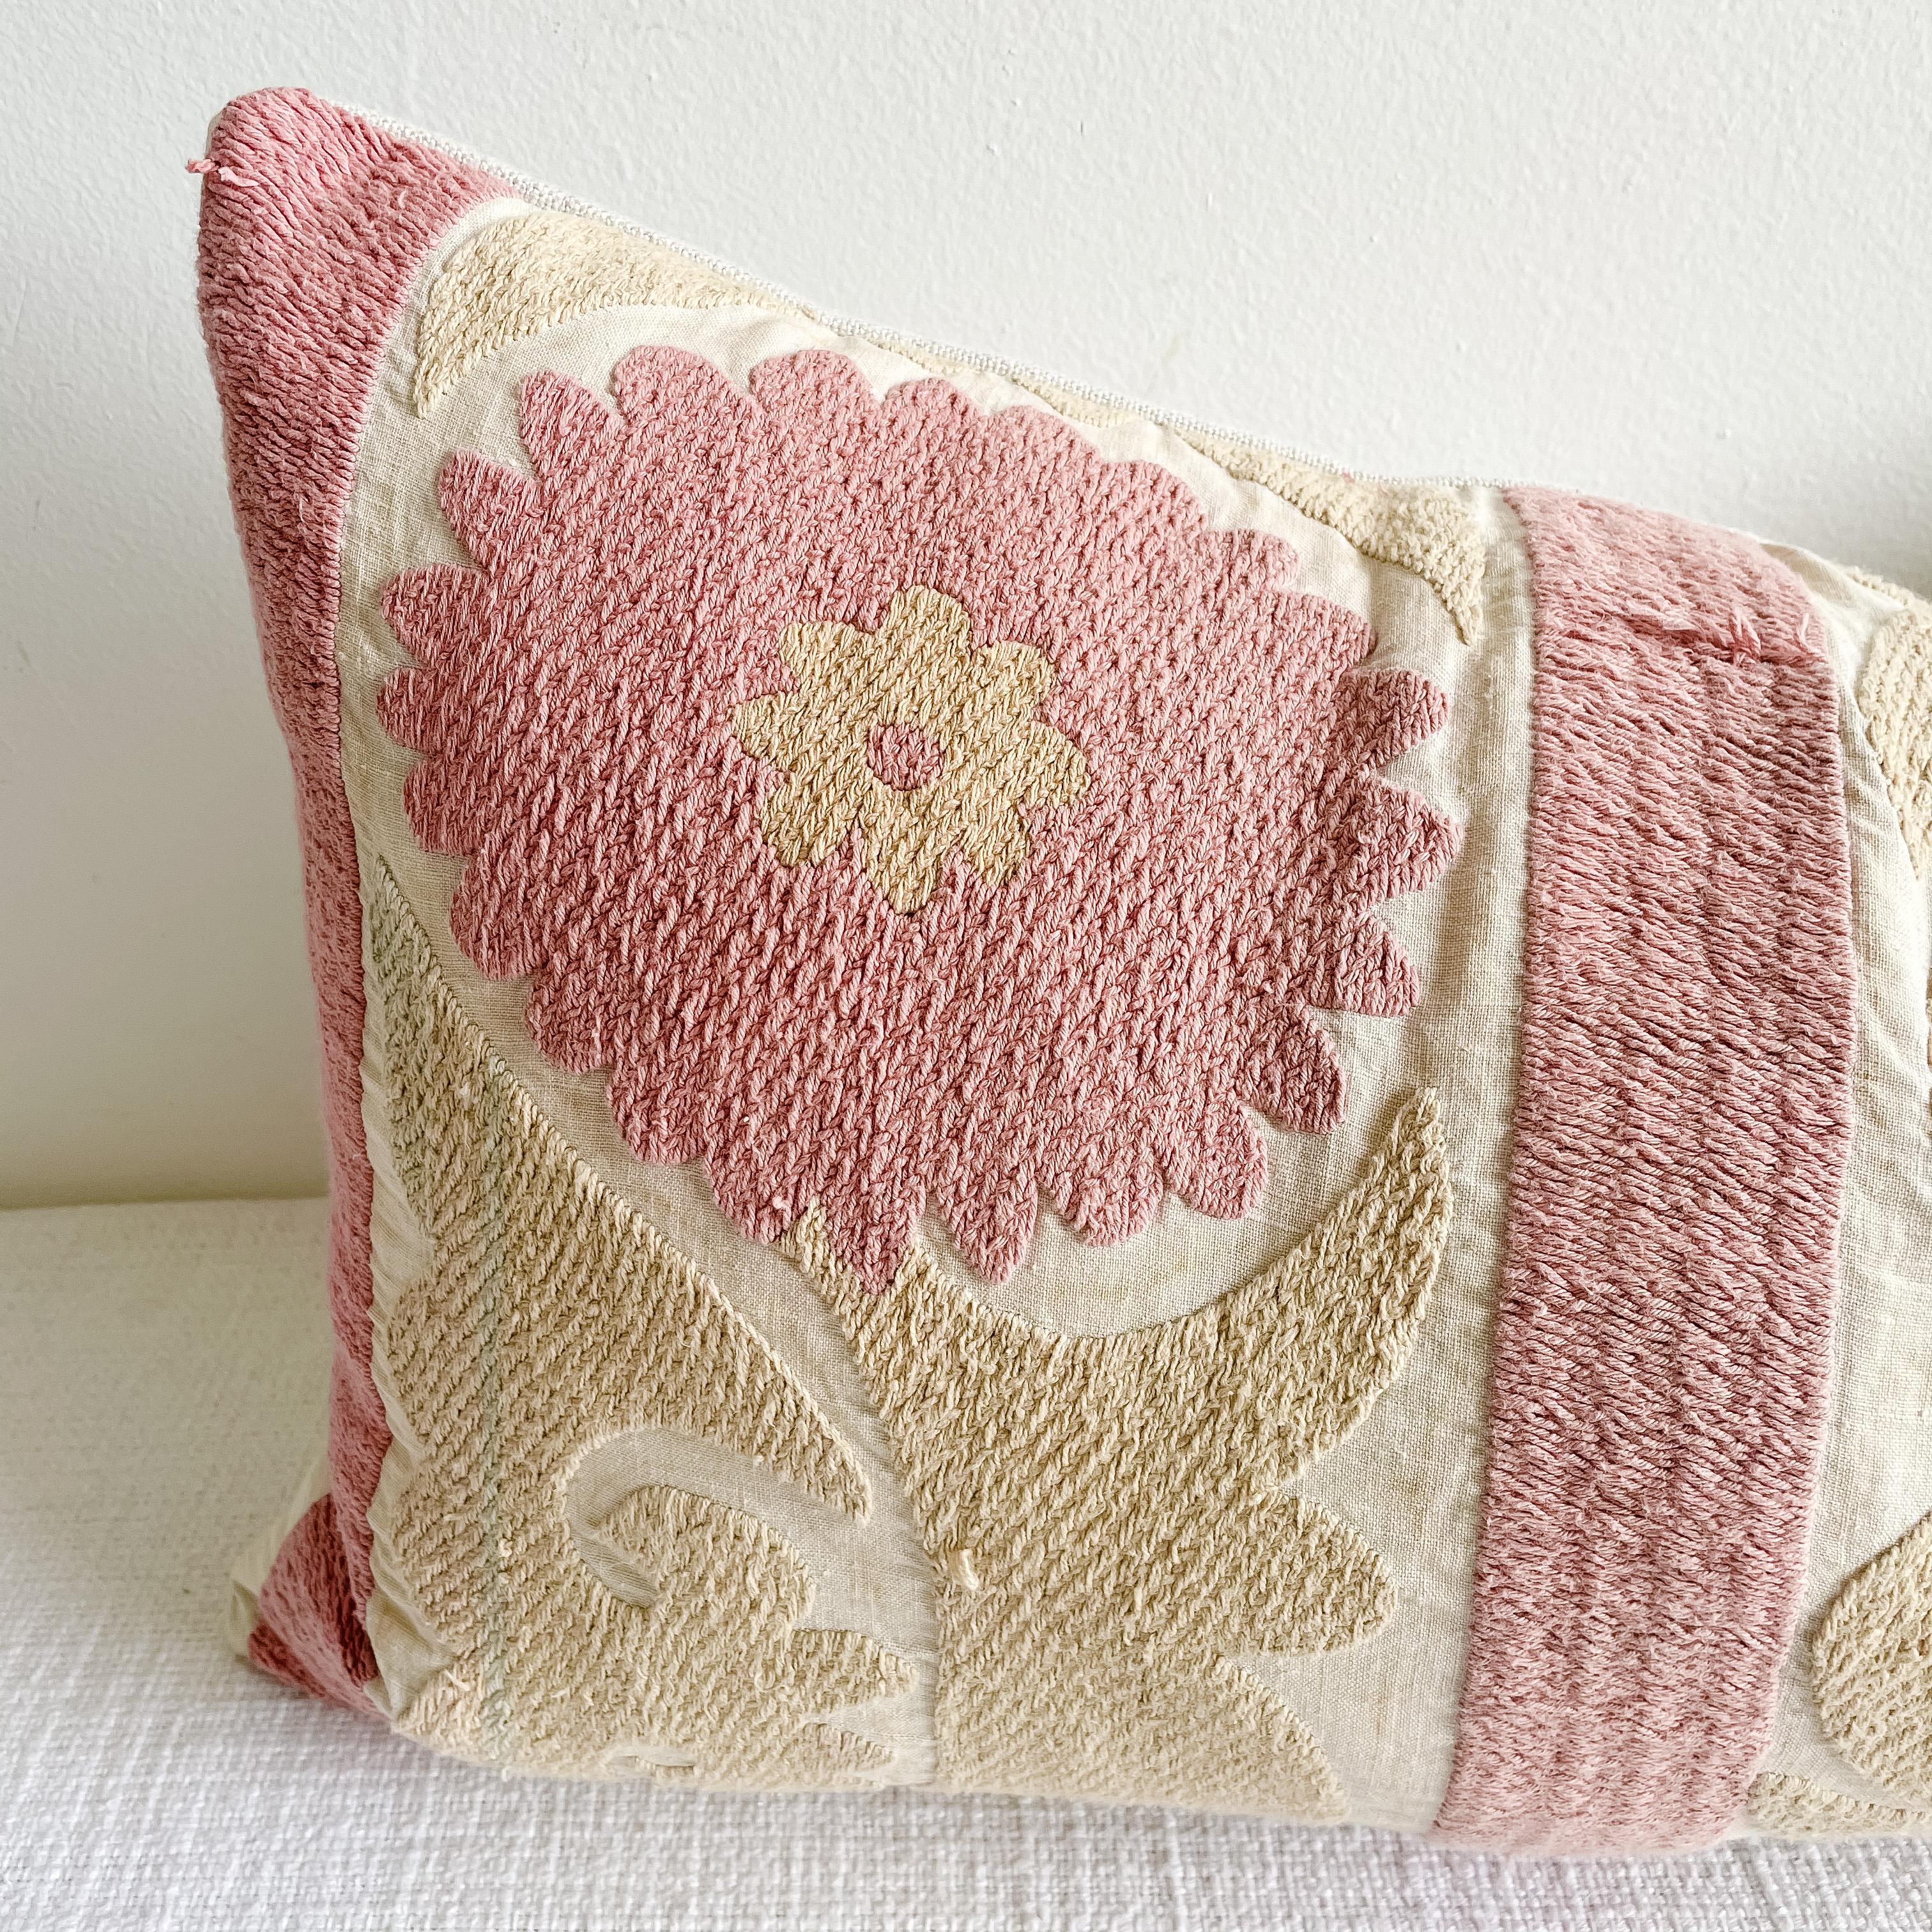 Vintage pale pink and tan embroidered Suzani on a natural muslin background. This vintage textile pillow face features a vintage Suzann quilt, natural linen colored background with original hand embroidery. The backing is 100% Belgian linen in